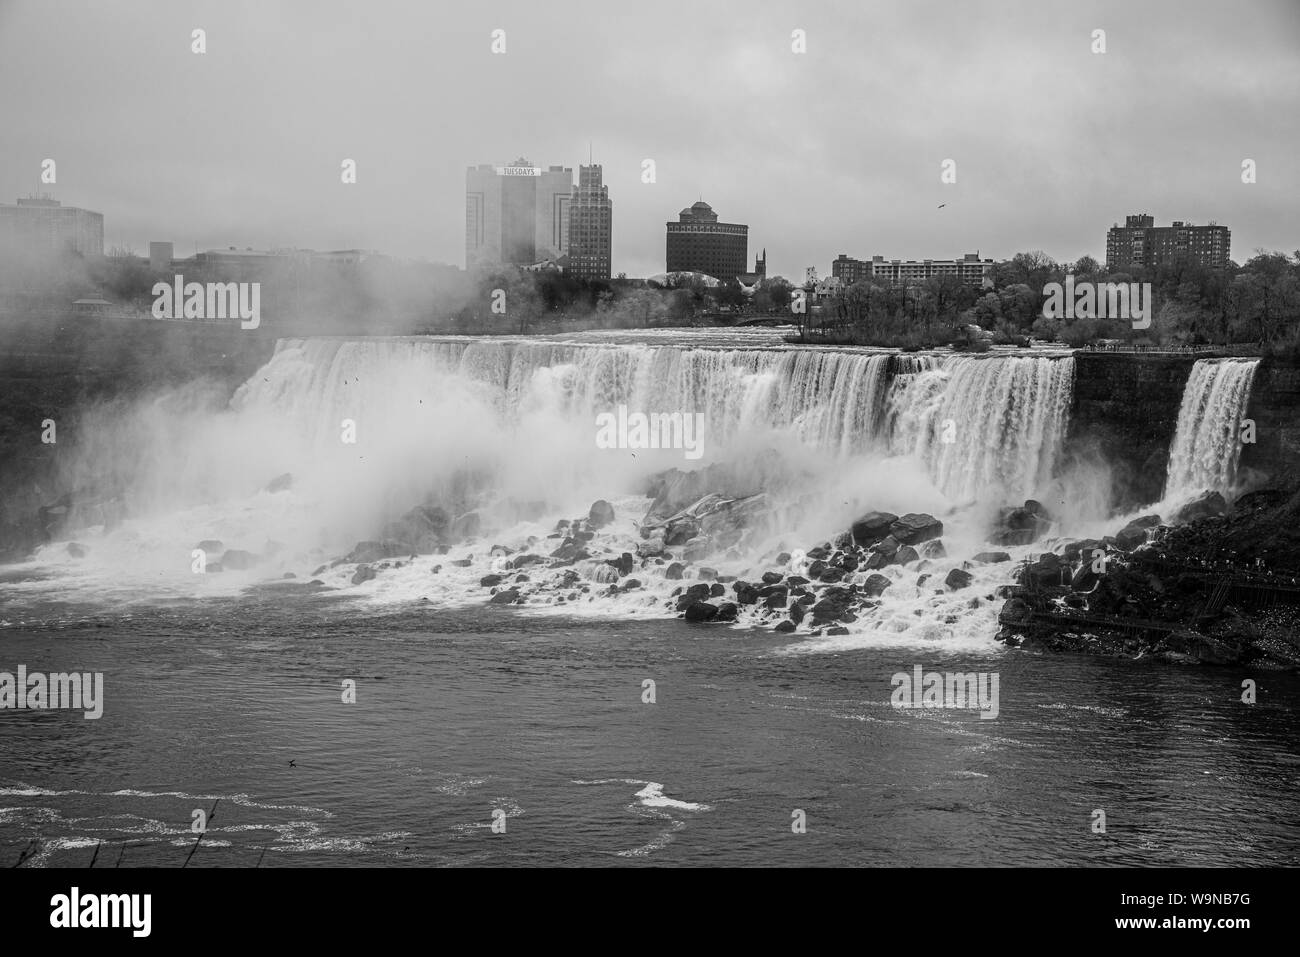 Panoramic views of Niagara falls from the Canadian side on a cloudy day Stock Photo